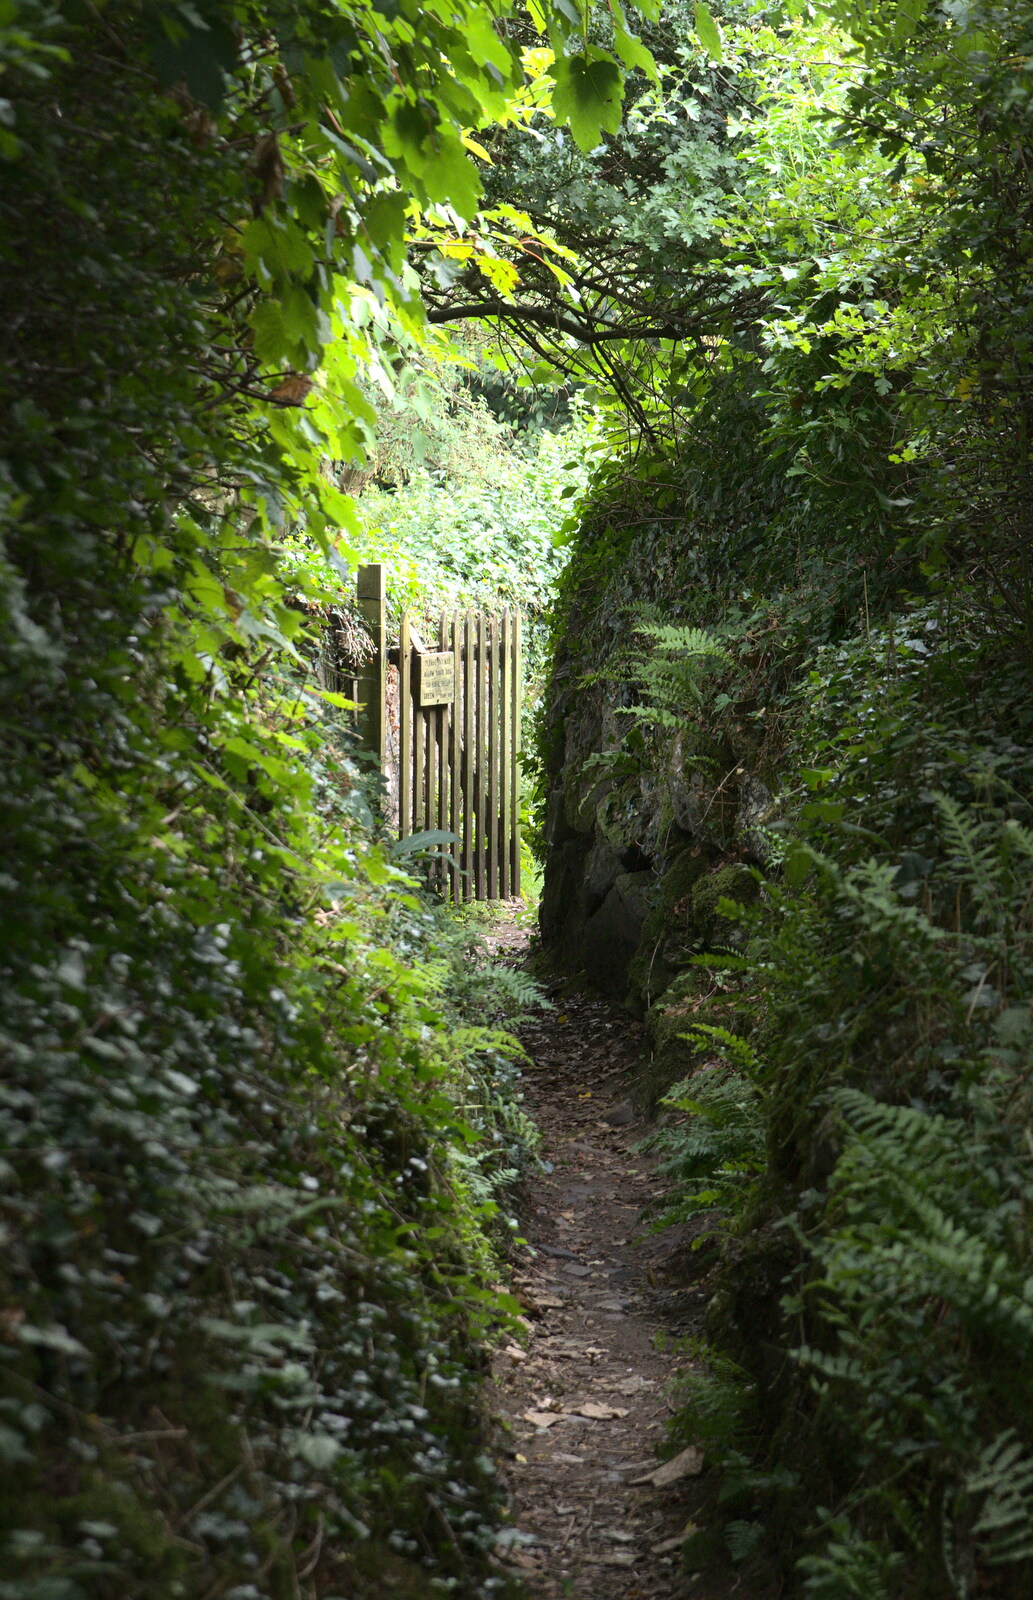 A secret passage from Finch's Foundry and Lydford Gorge, Dartmoor, Devon - 12th August 2016